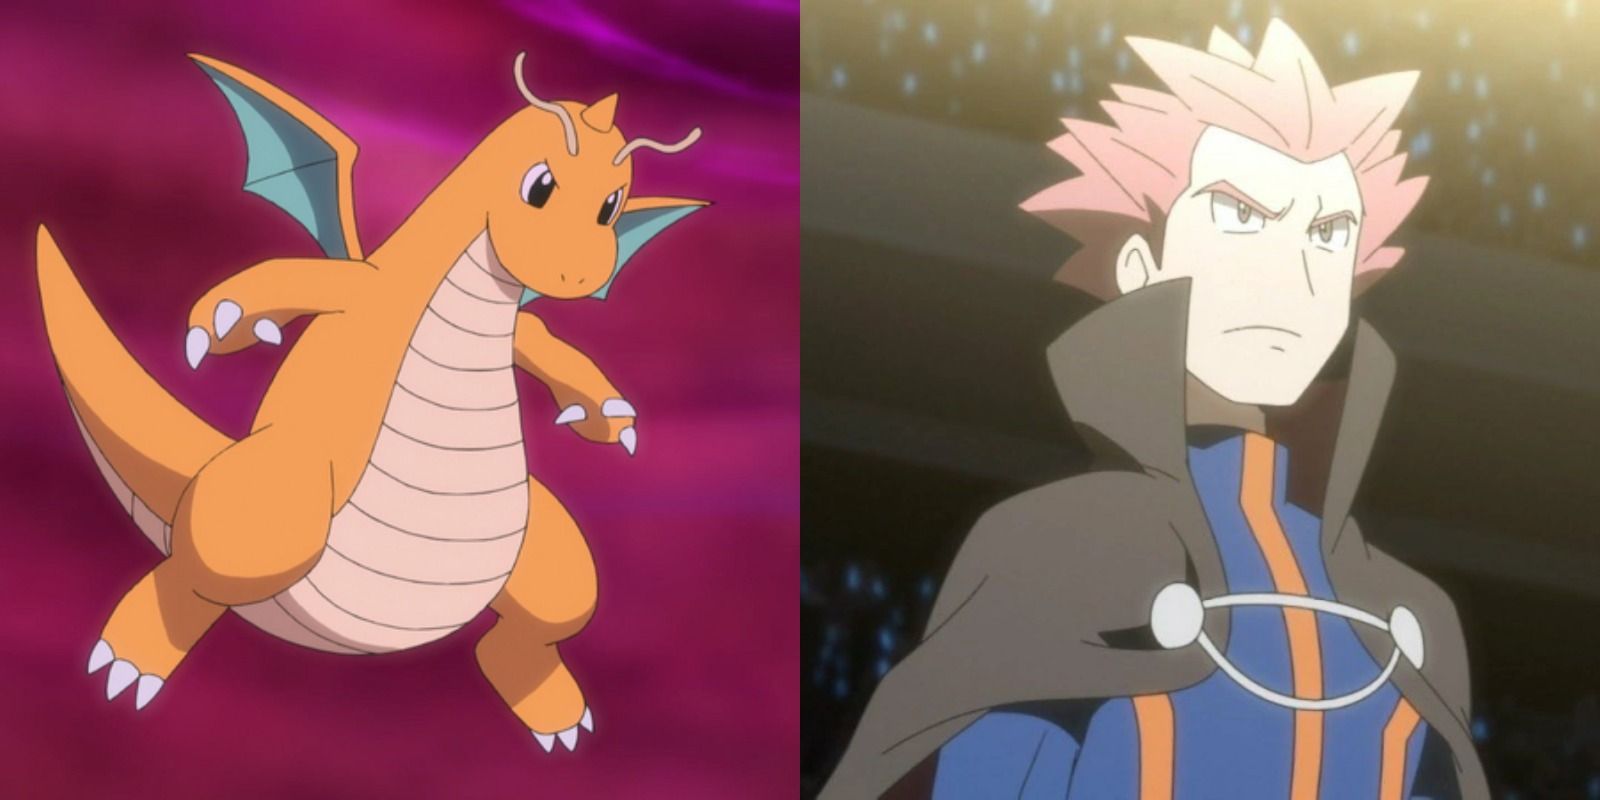 Split image showing Dragonite and Lance in the Pokémon anime